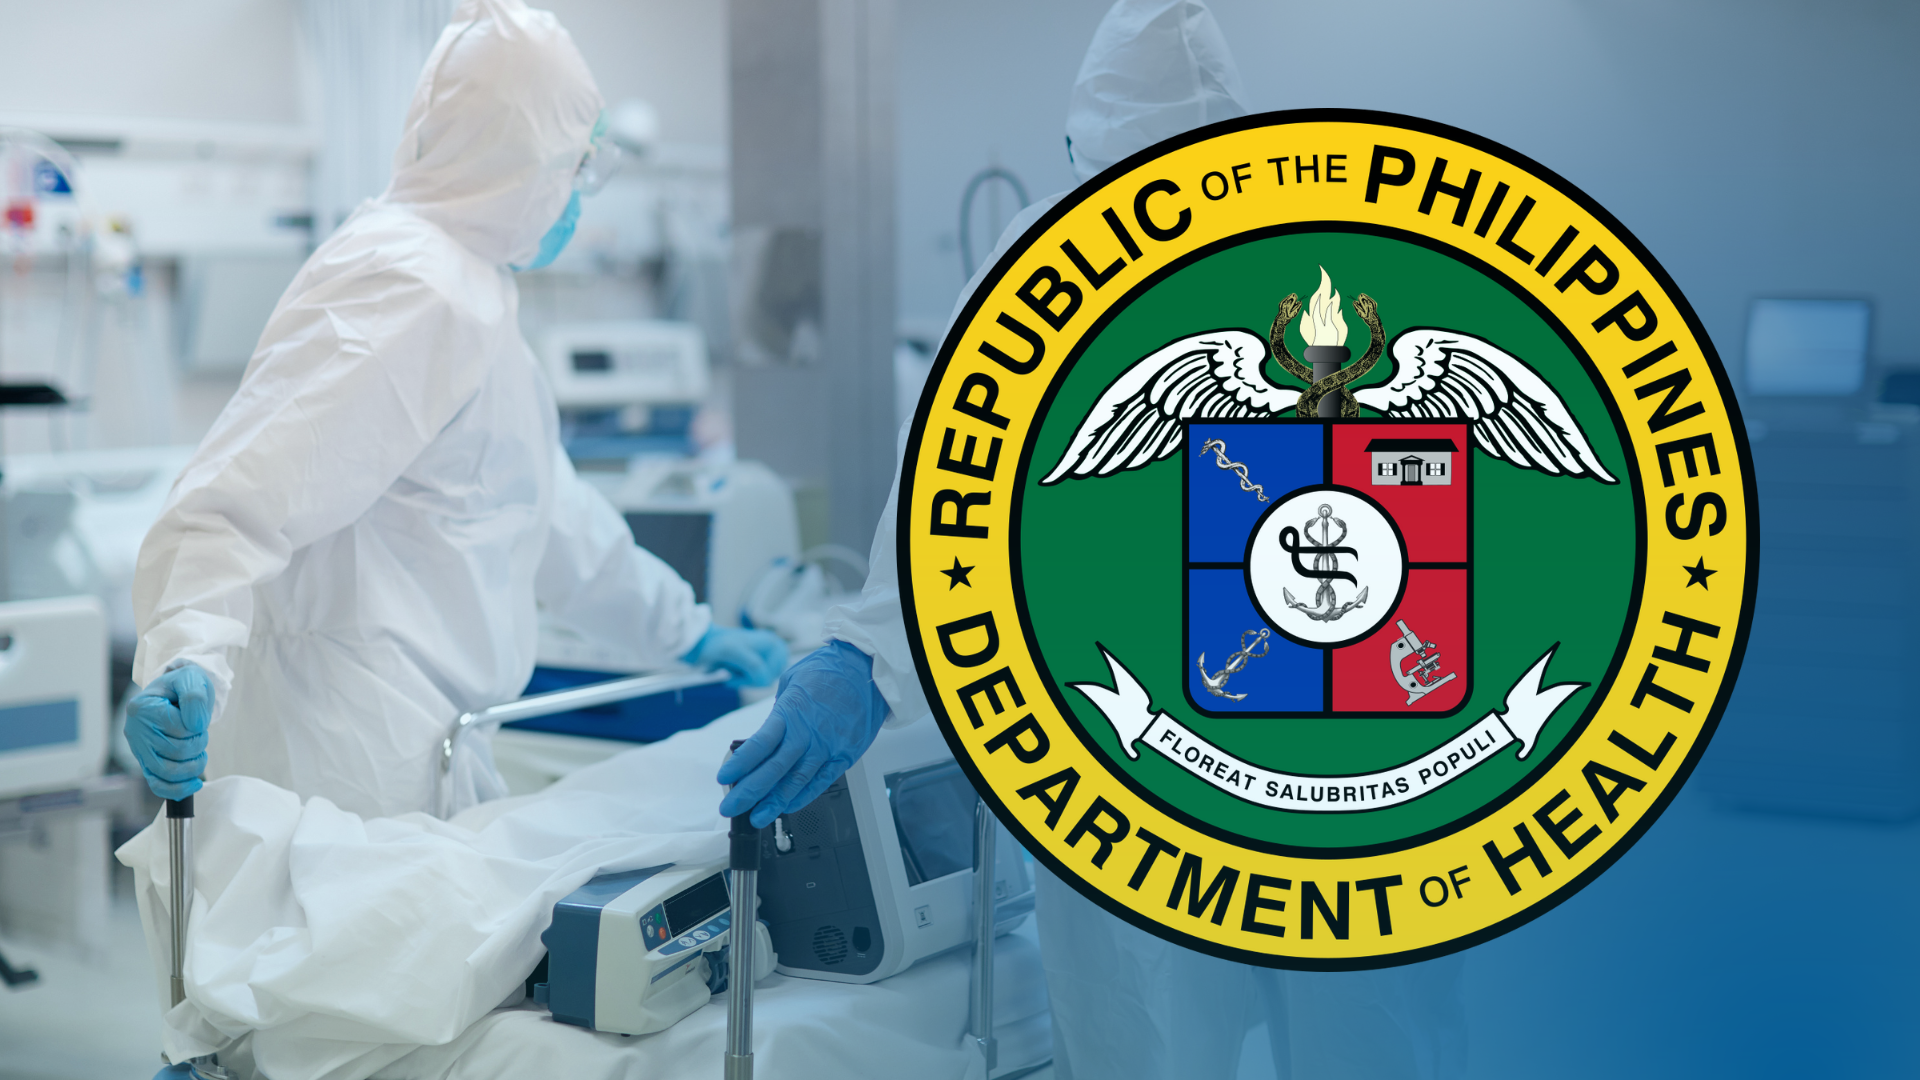 DOH logo over background pic of medical workers xbb subvariant